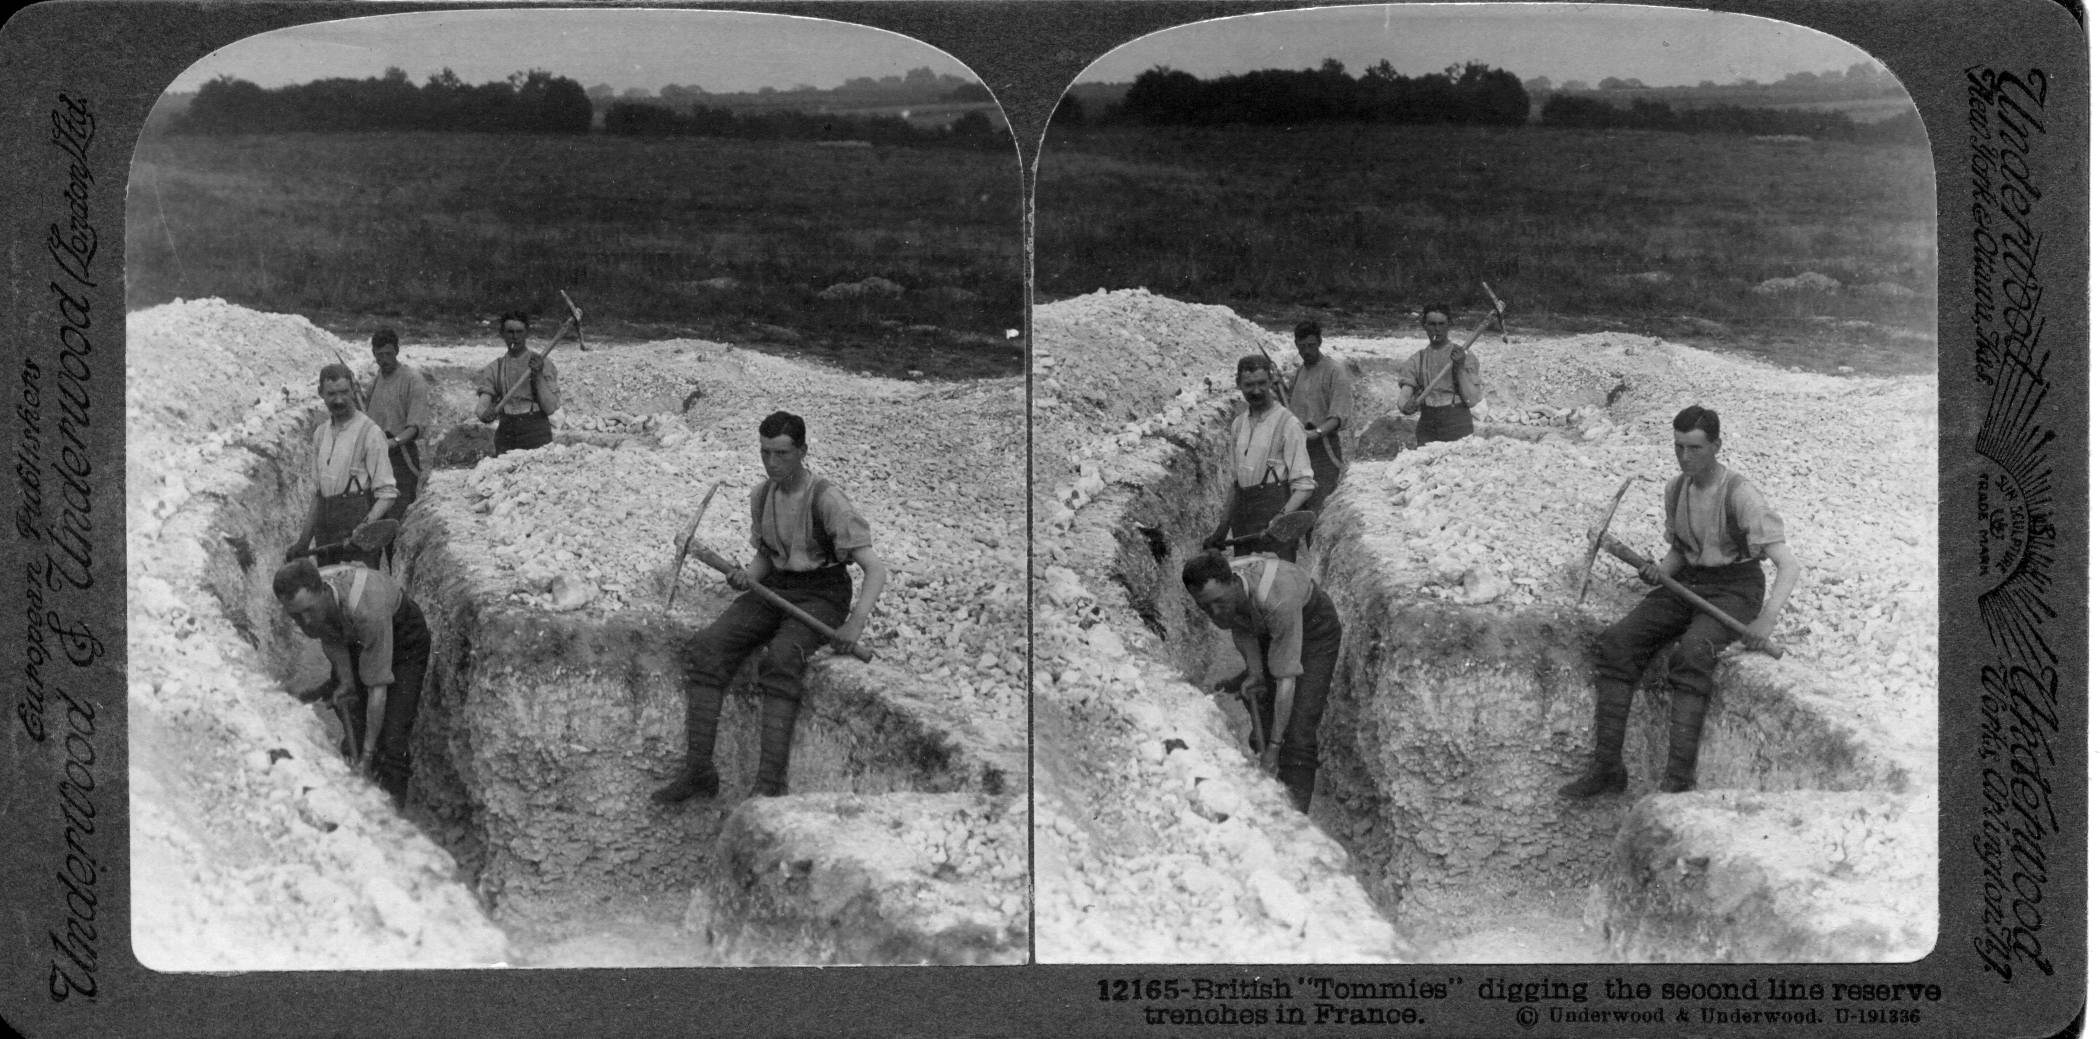 British "Tommies" digging the second line reserve trenches in France